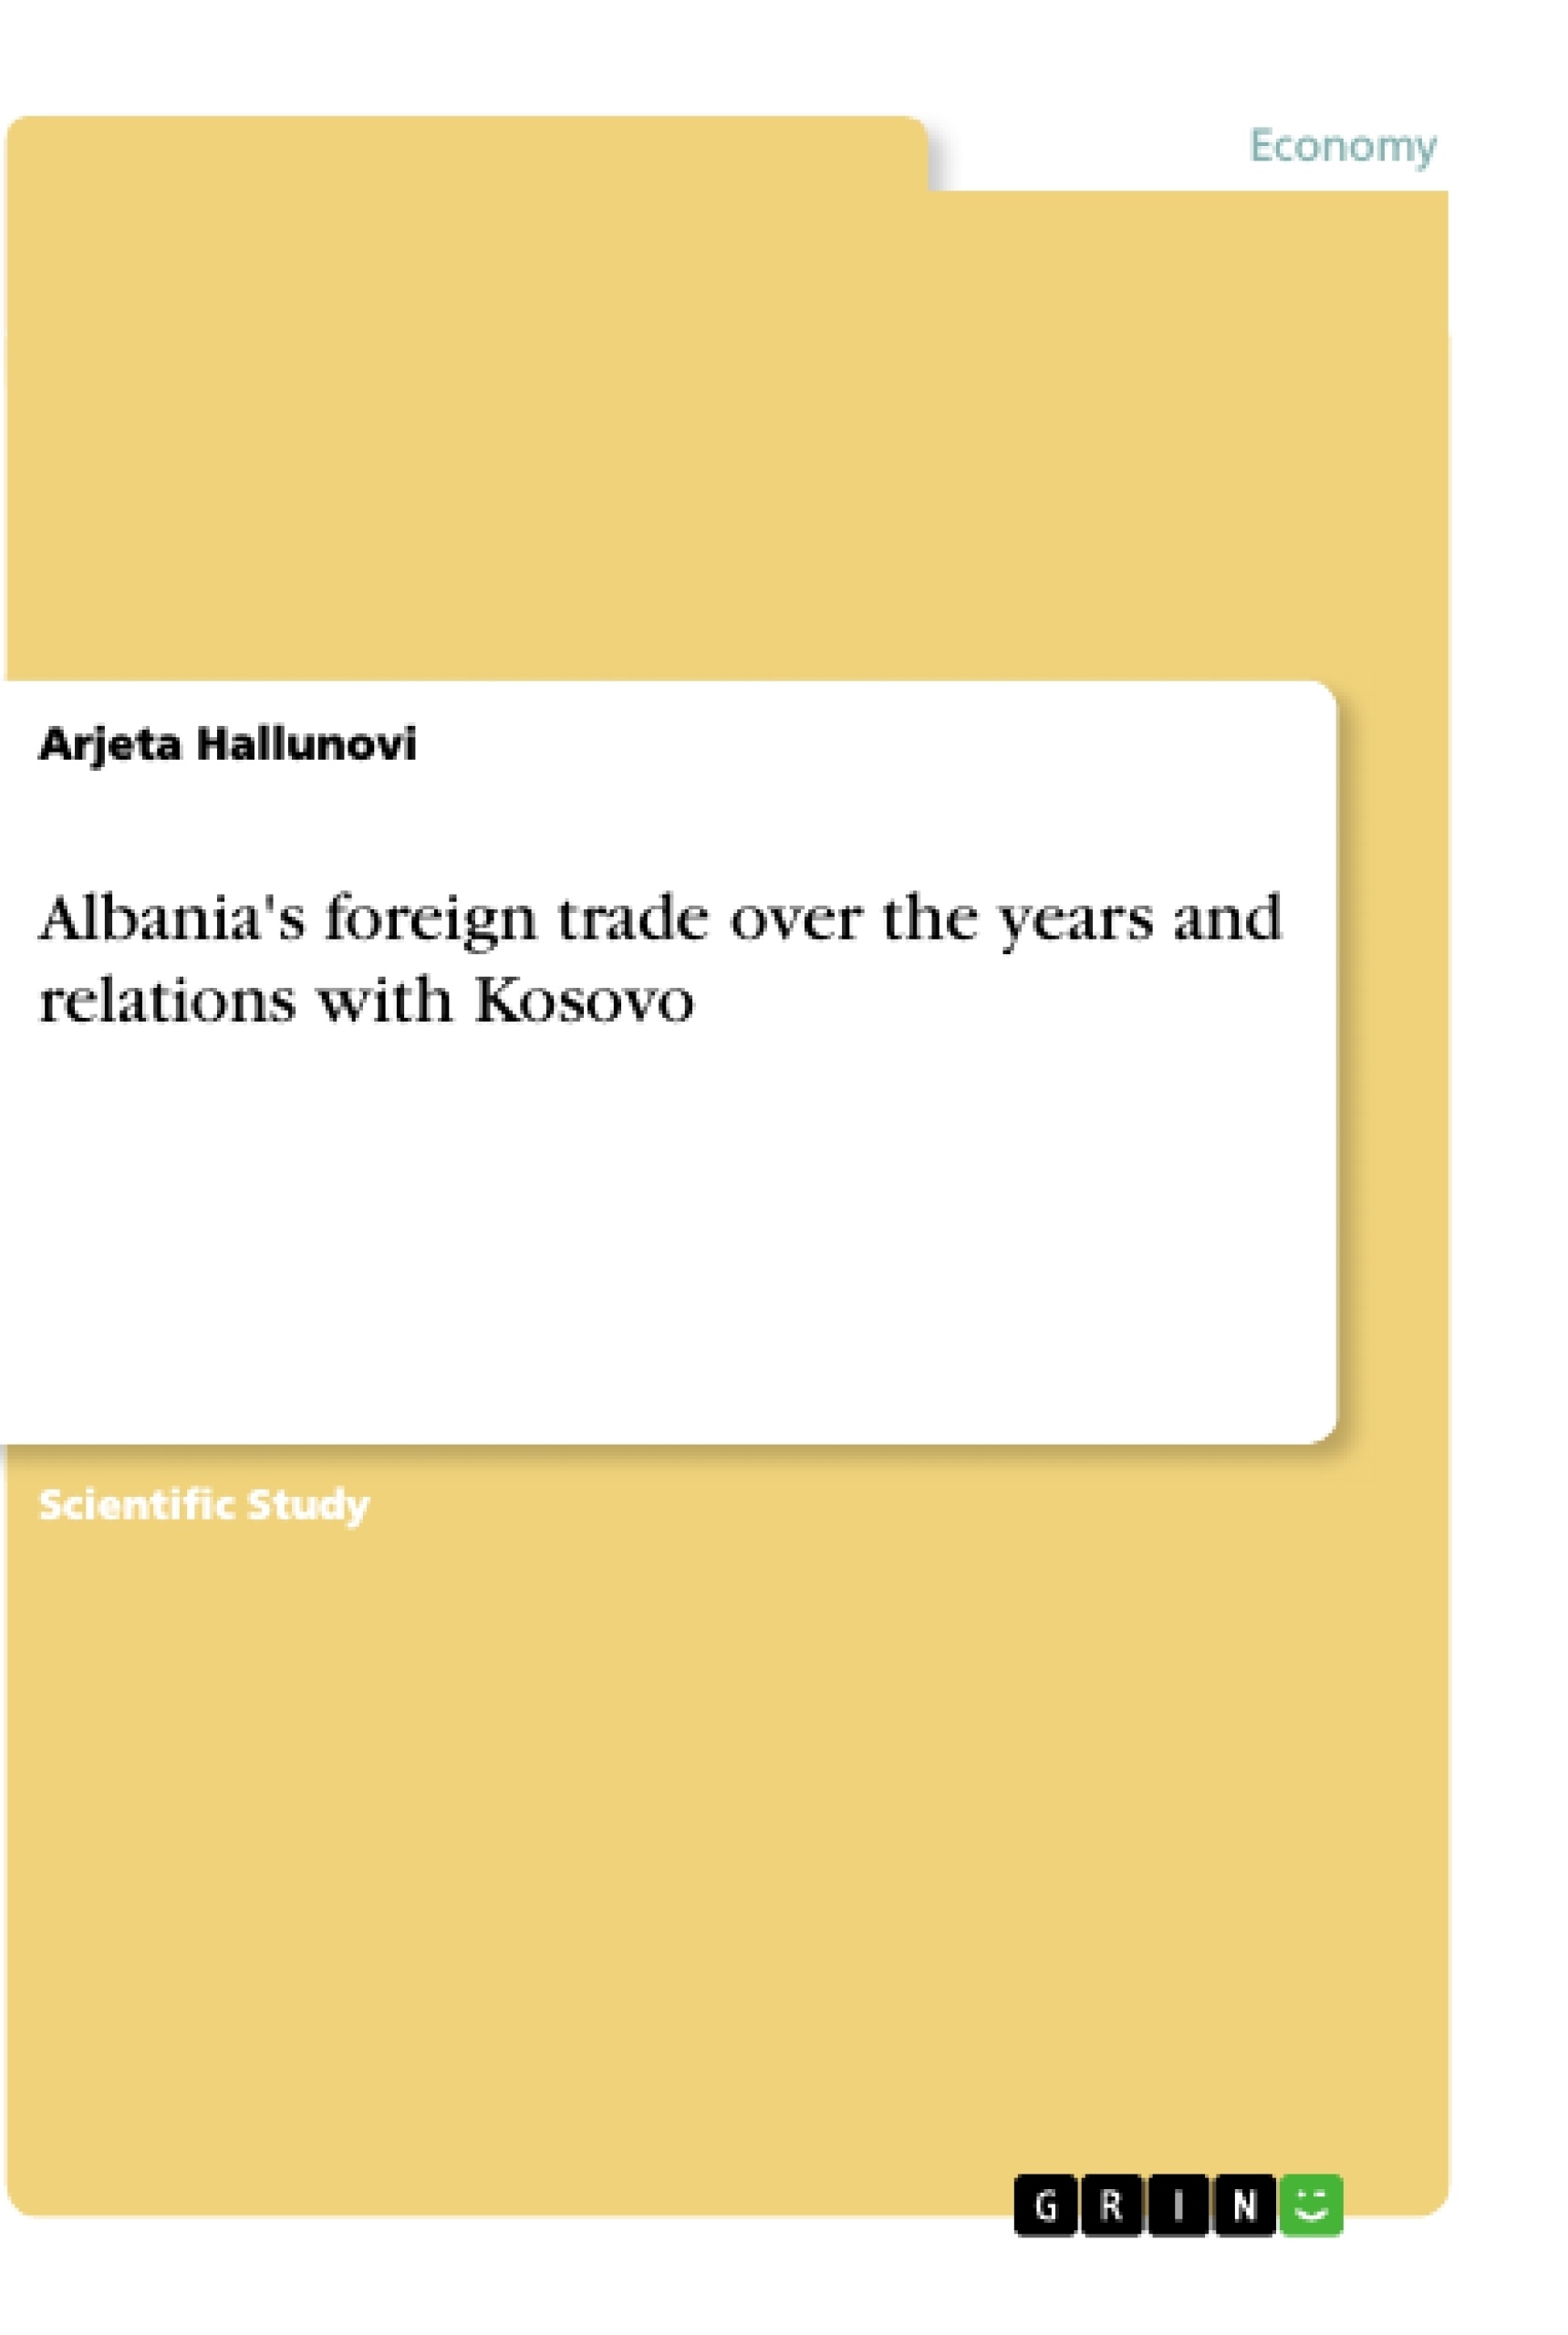 Titre: Albania's foreign trade over the years and relations with Kosovo